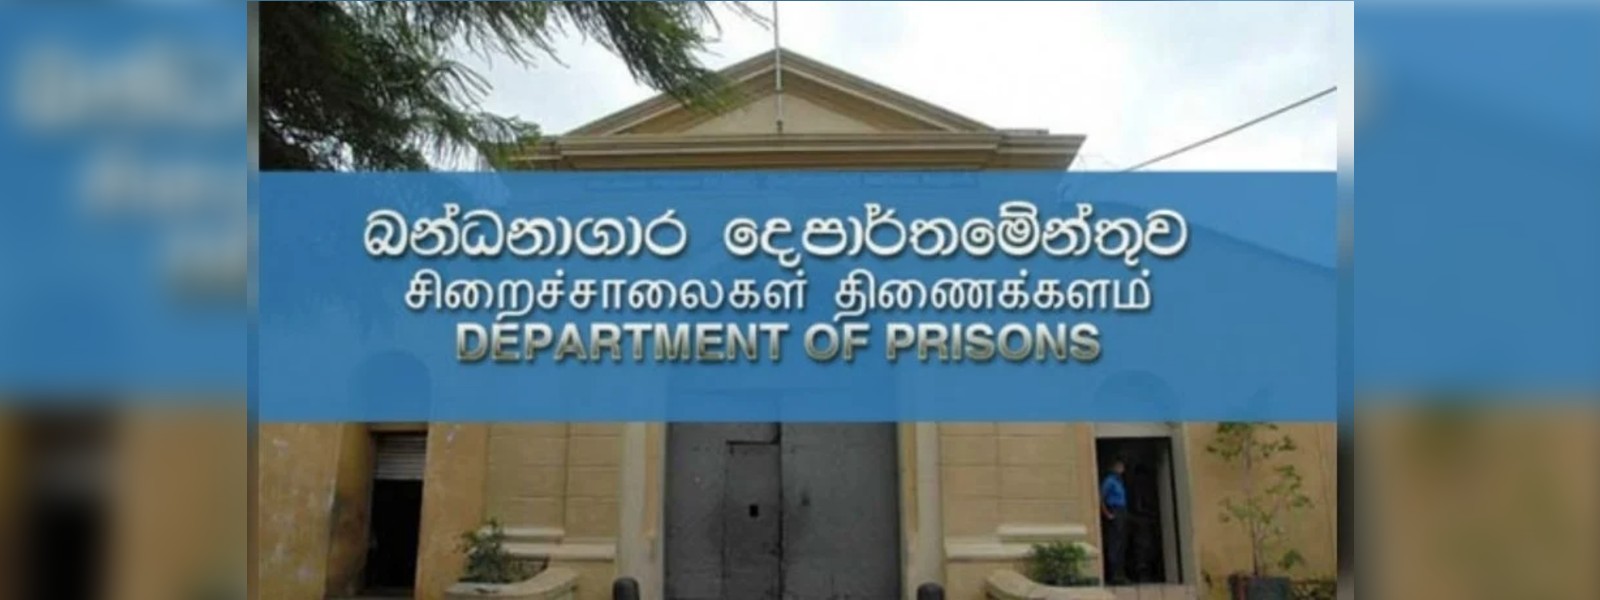 Visitations to prisons allowed from today